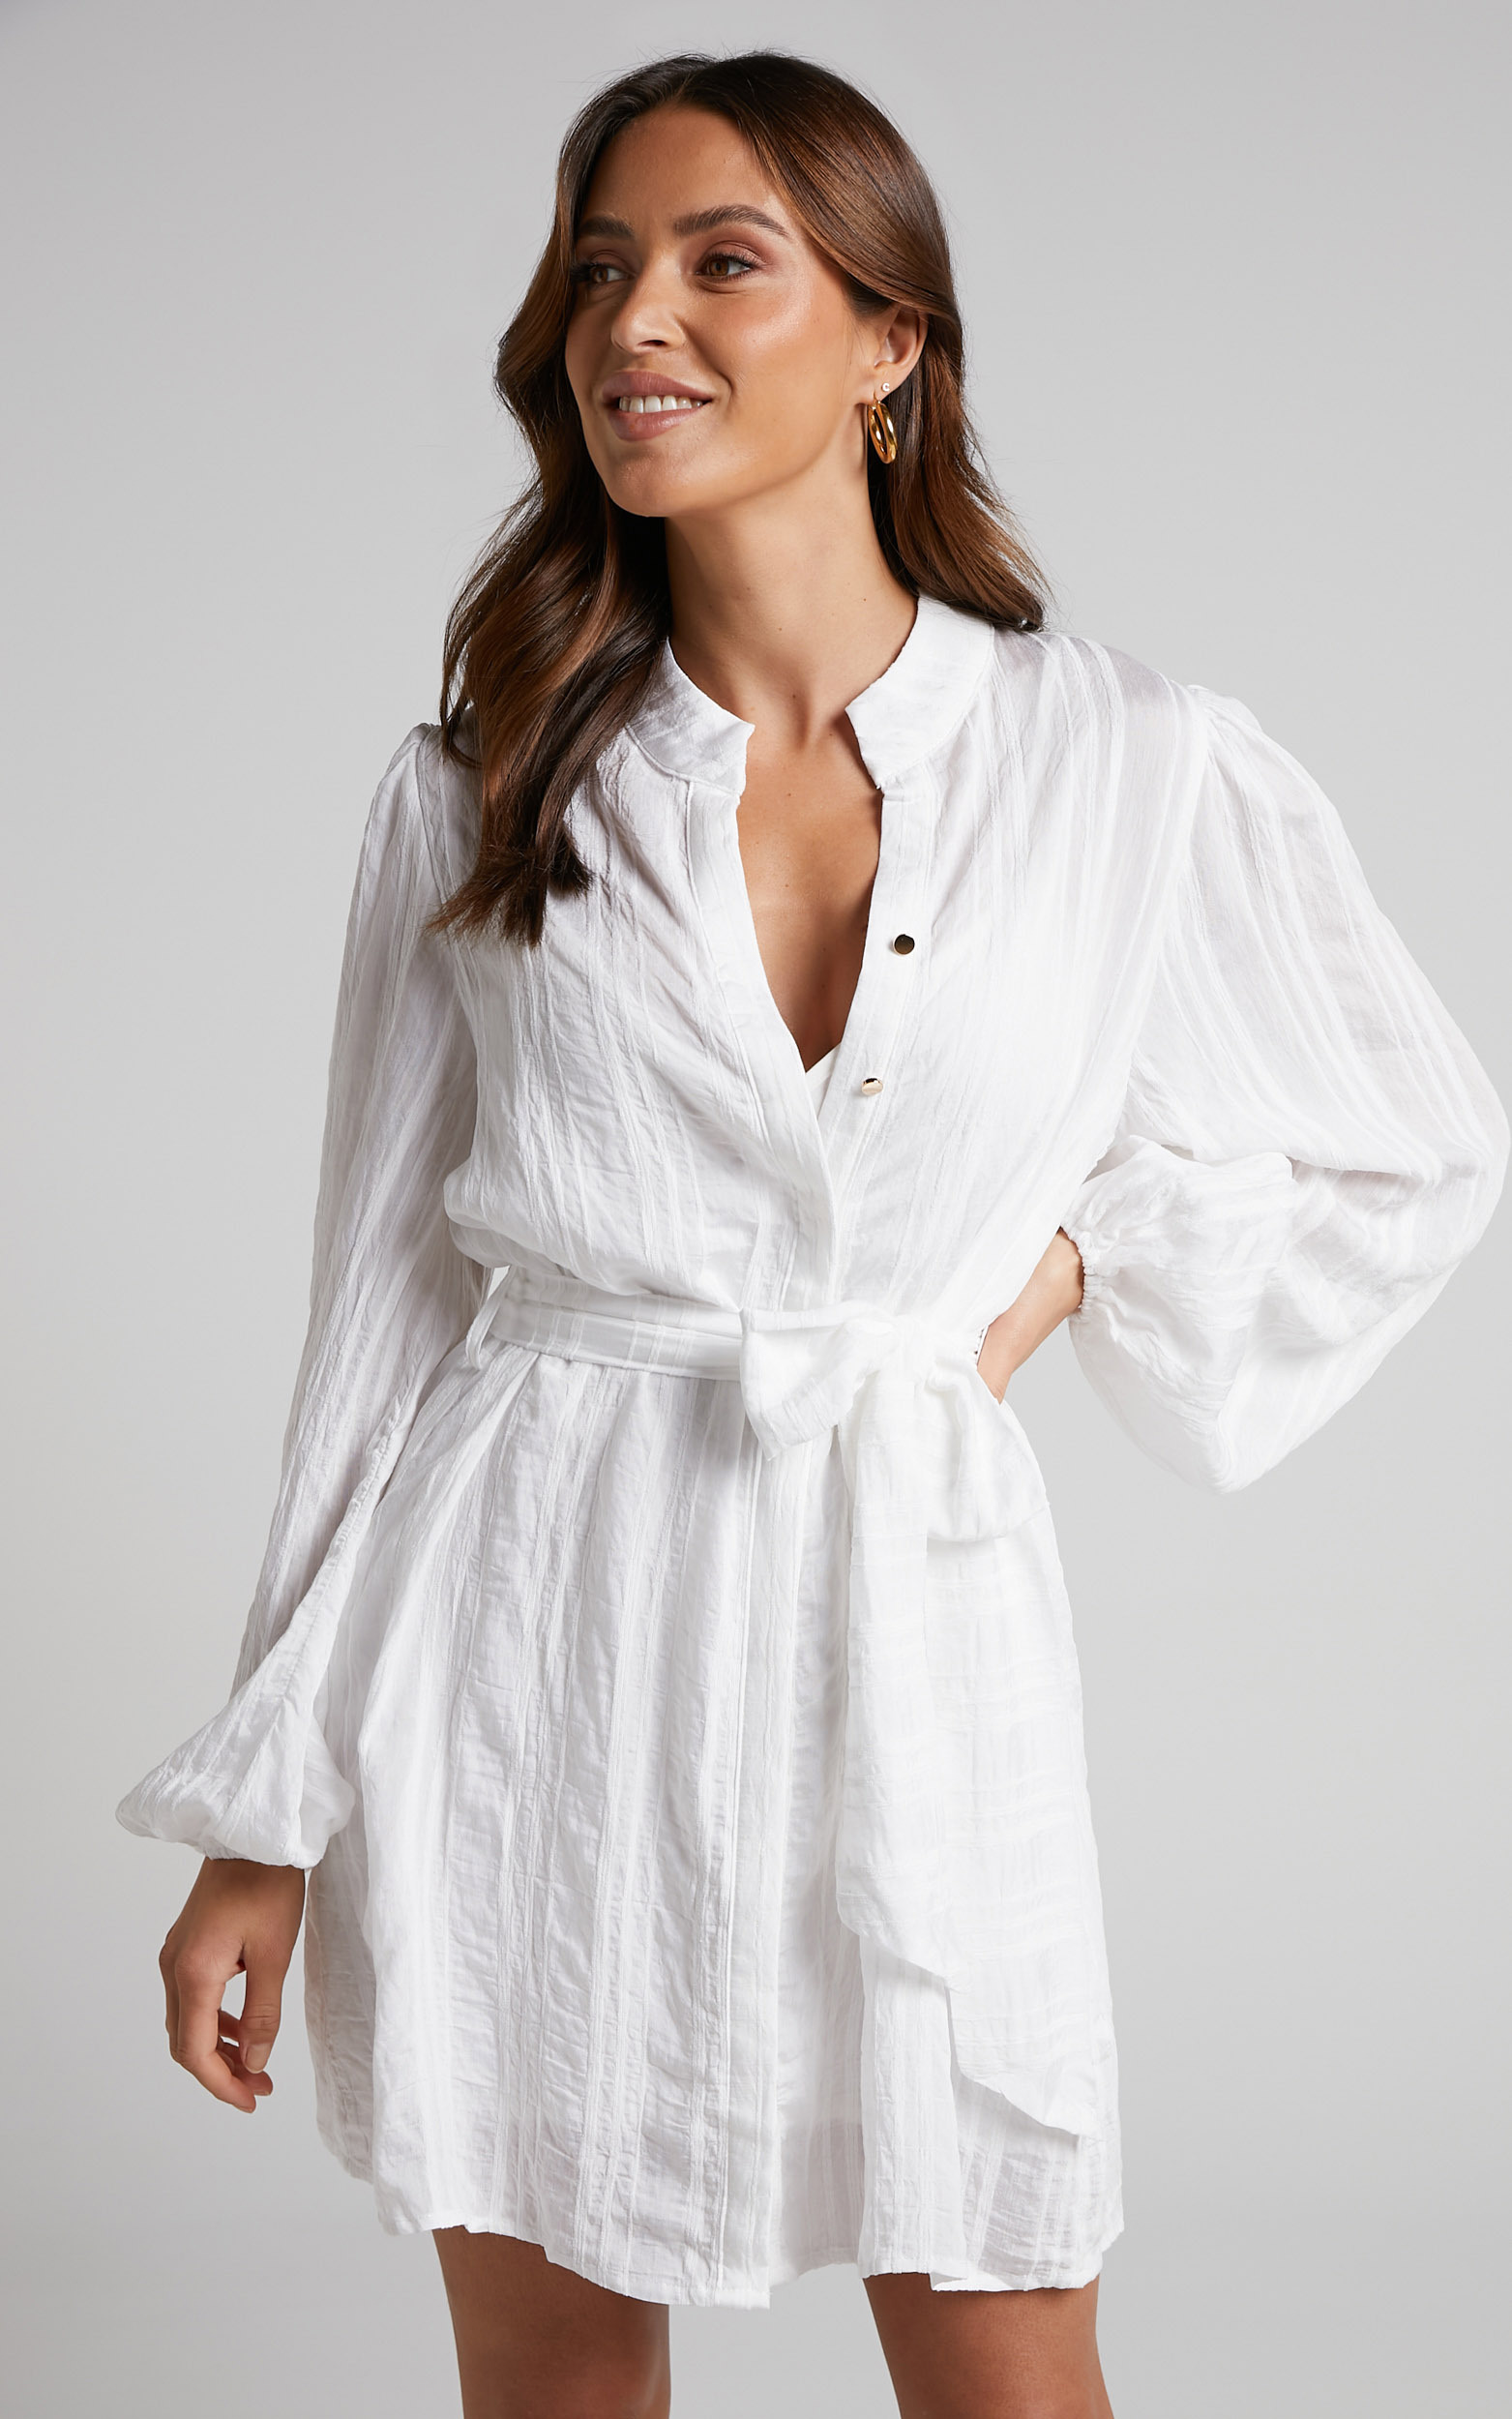 Maika Mini Dress - Button Up Balloon Sleeve Shirt Dress in White - 04, WHT1, hi-res image number null